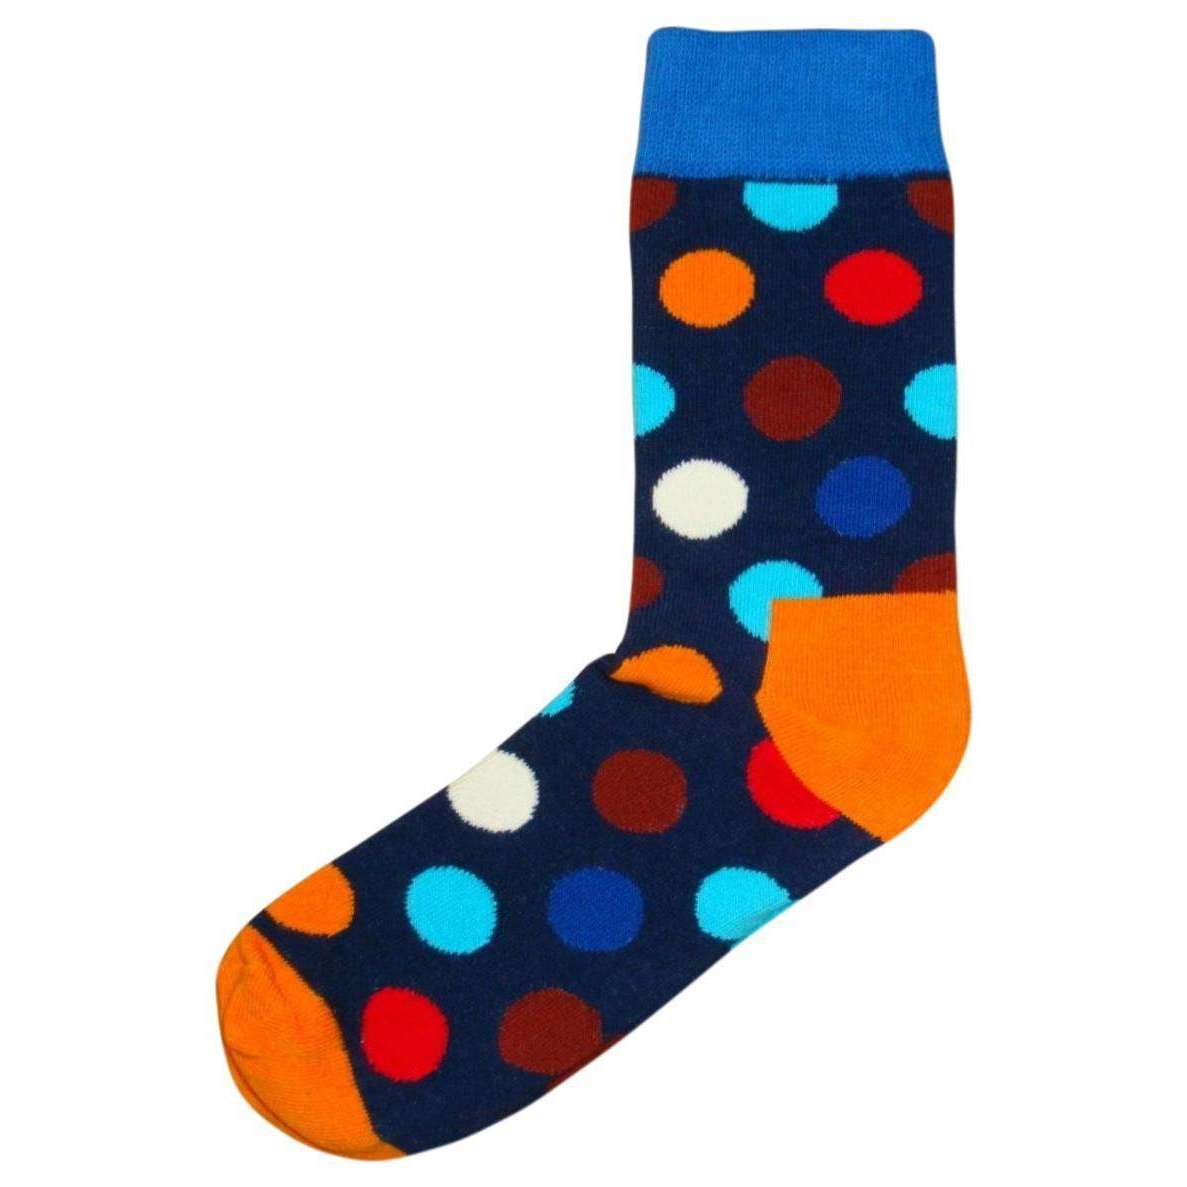 Bassin and Brown Contrast Heel and Toe Spotted Socks - Navy/Blue/Orange